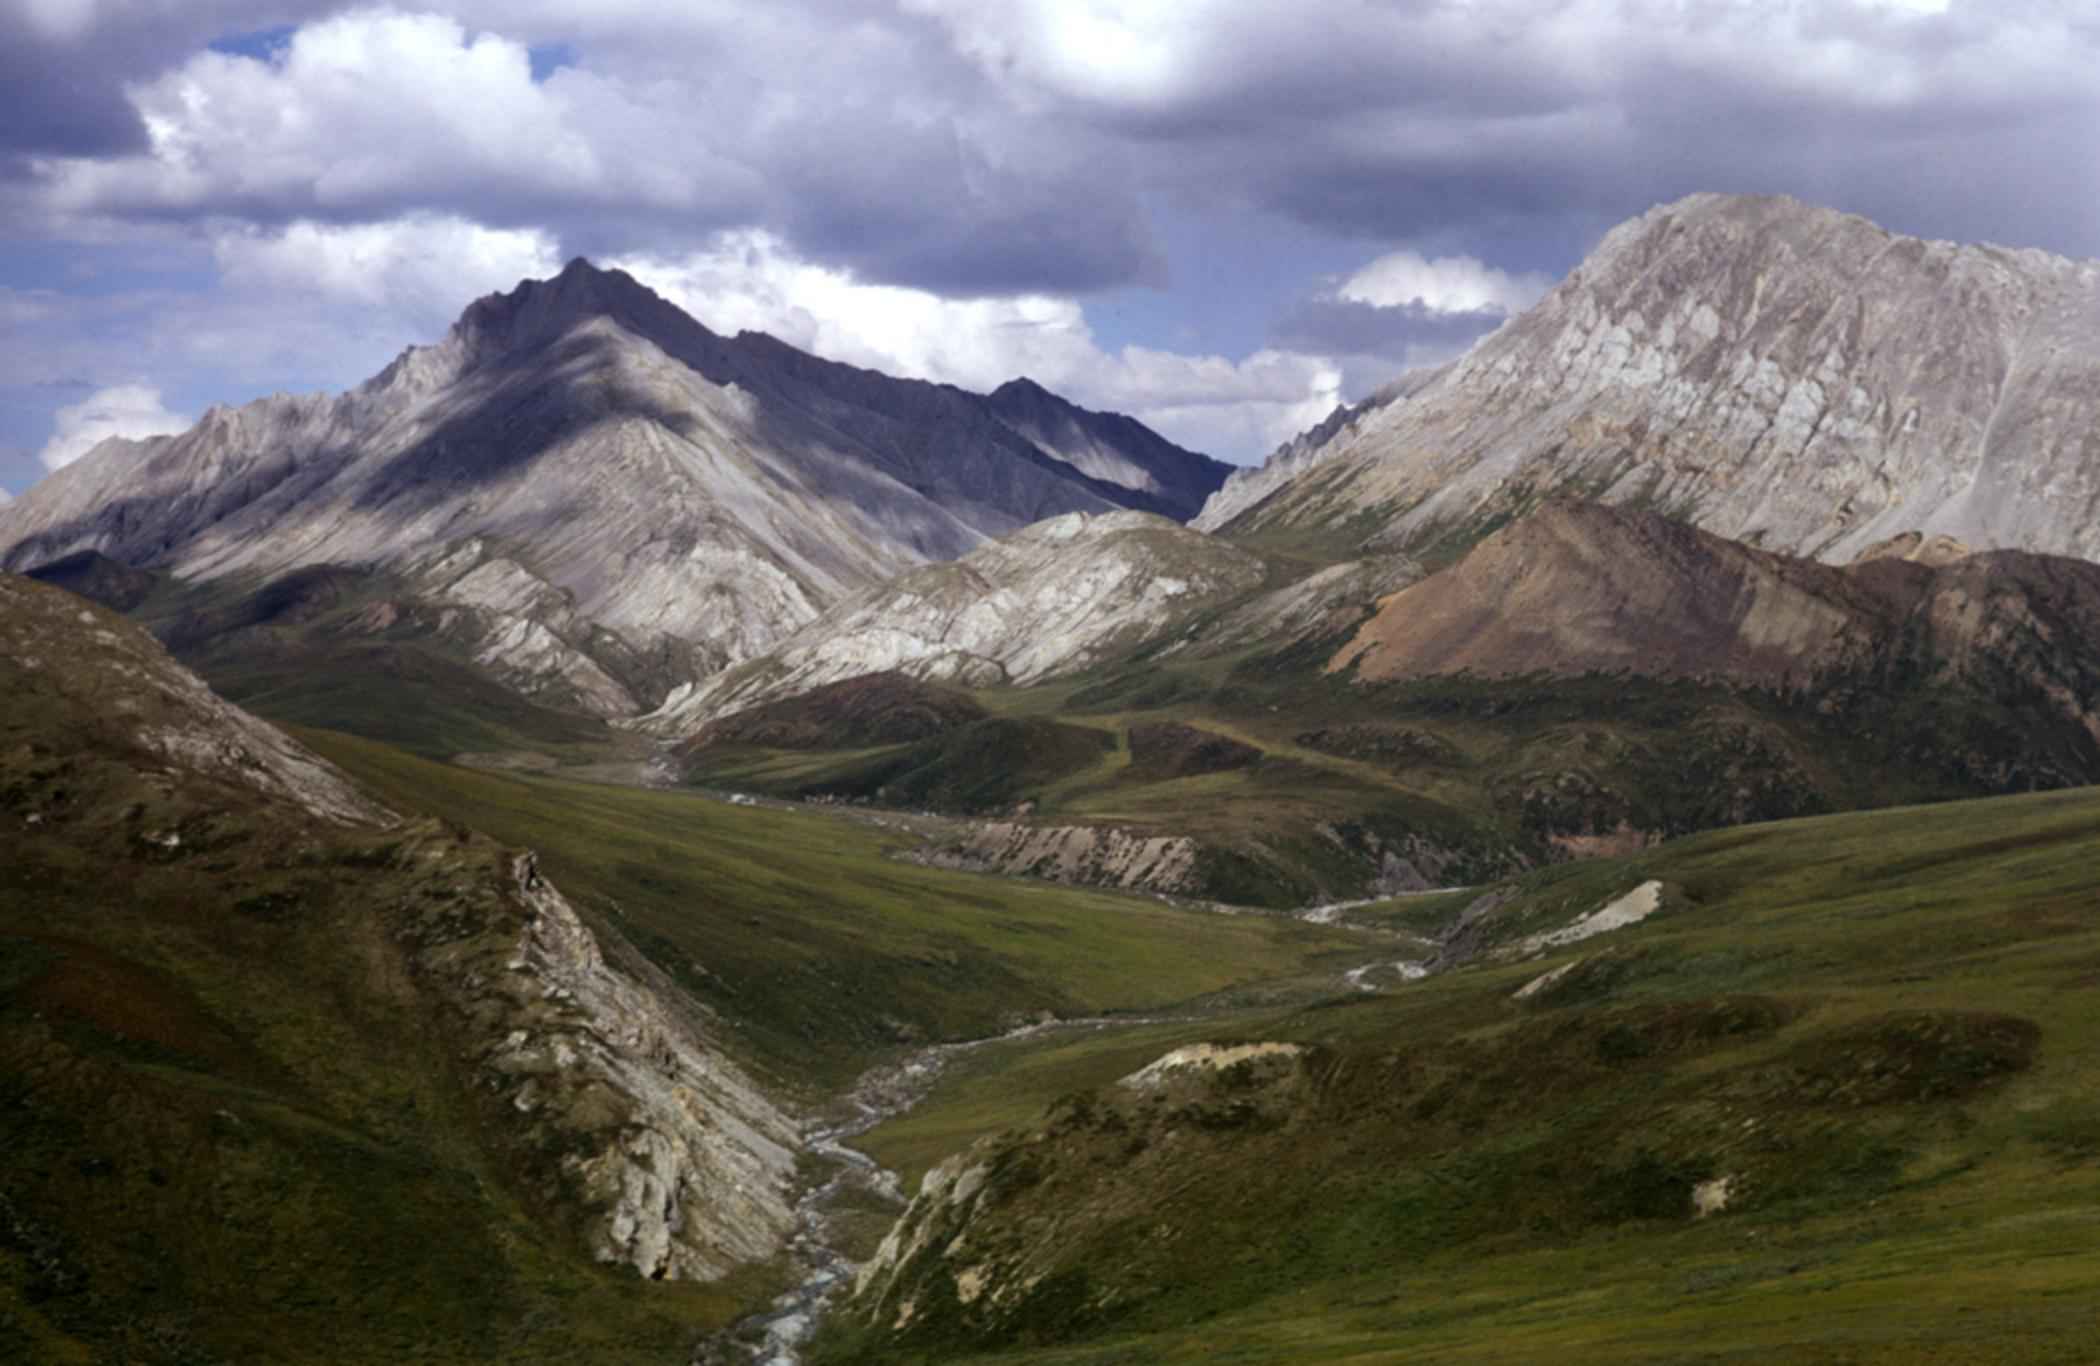 File:Summer landscape in mountains.jpg - Wikimedia Commons